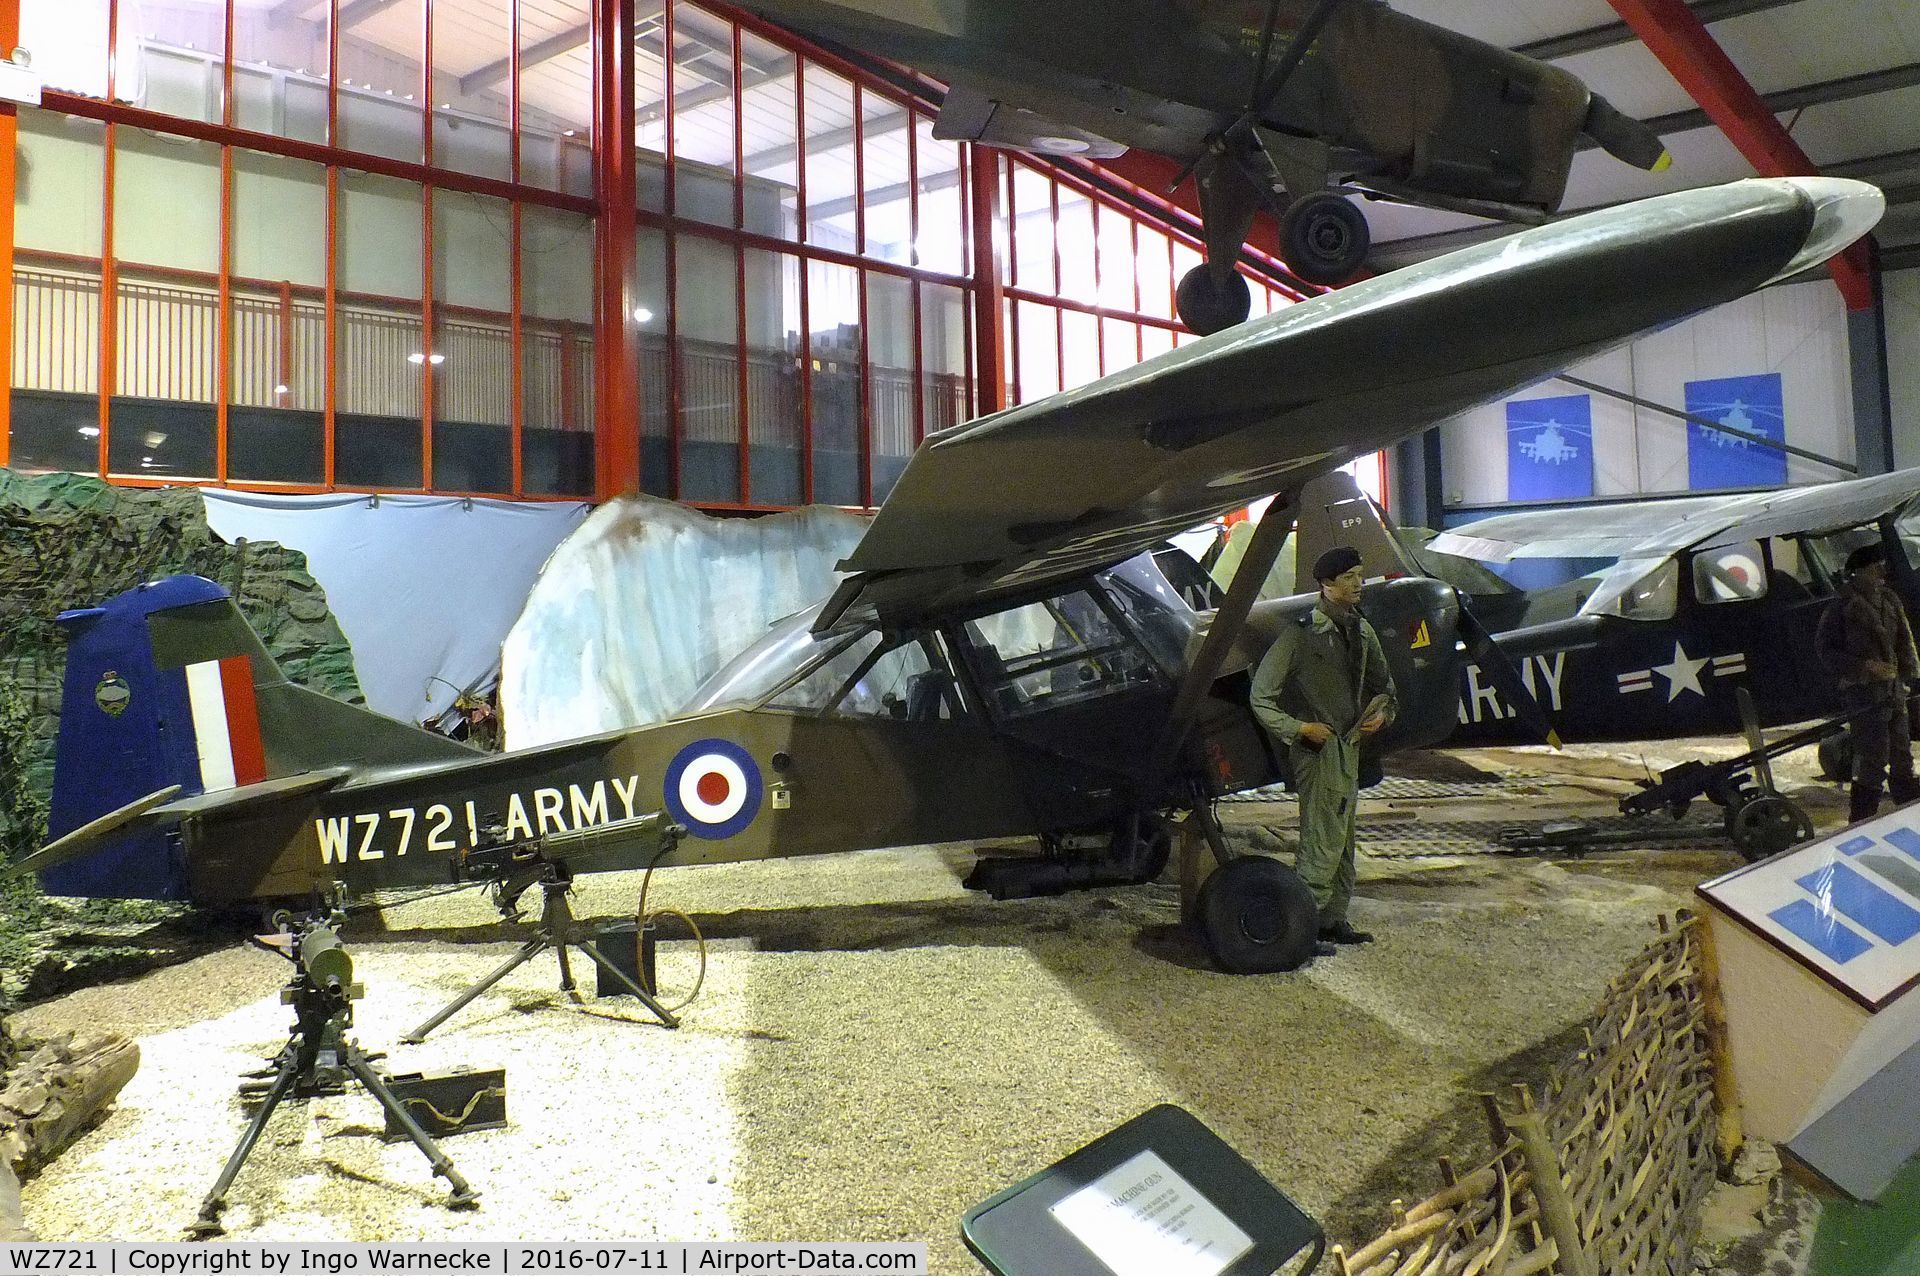 WZ721, Auster AOP.9 C/N B5/10/45, Auster AOP9 at the Museum of Army Flying, Middle Wallop